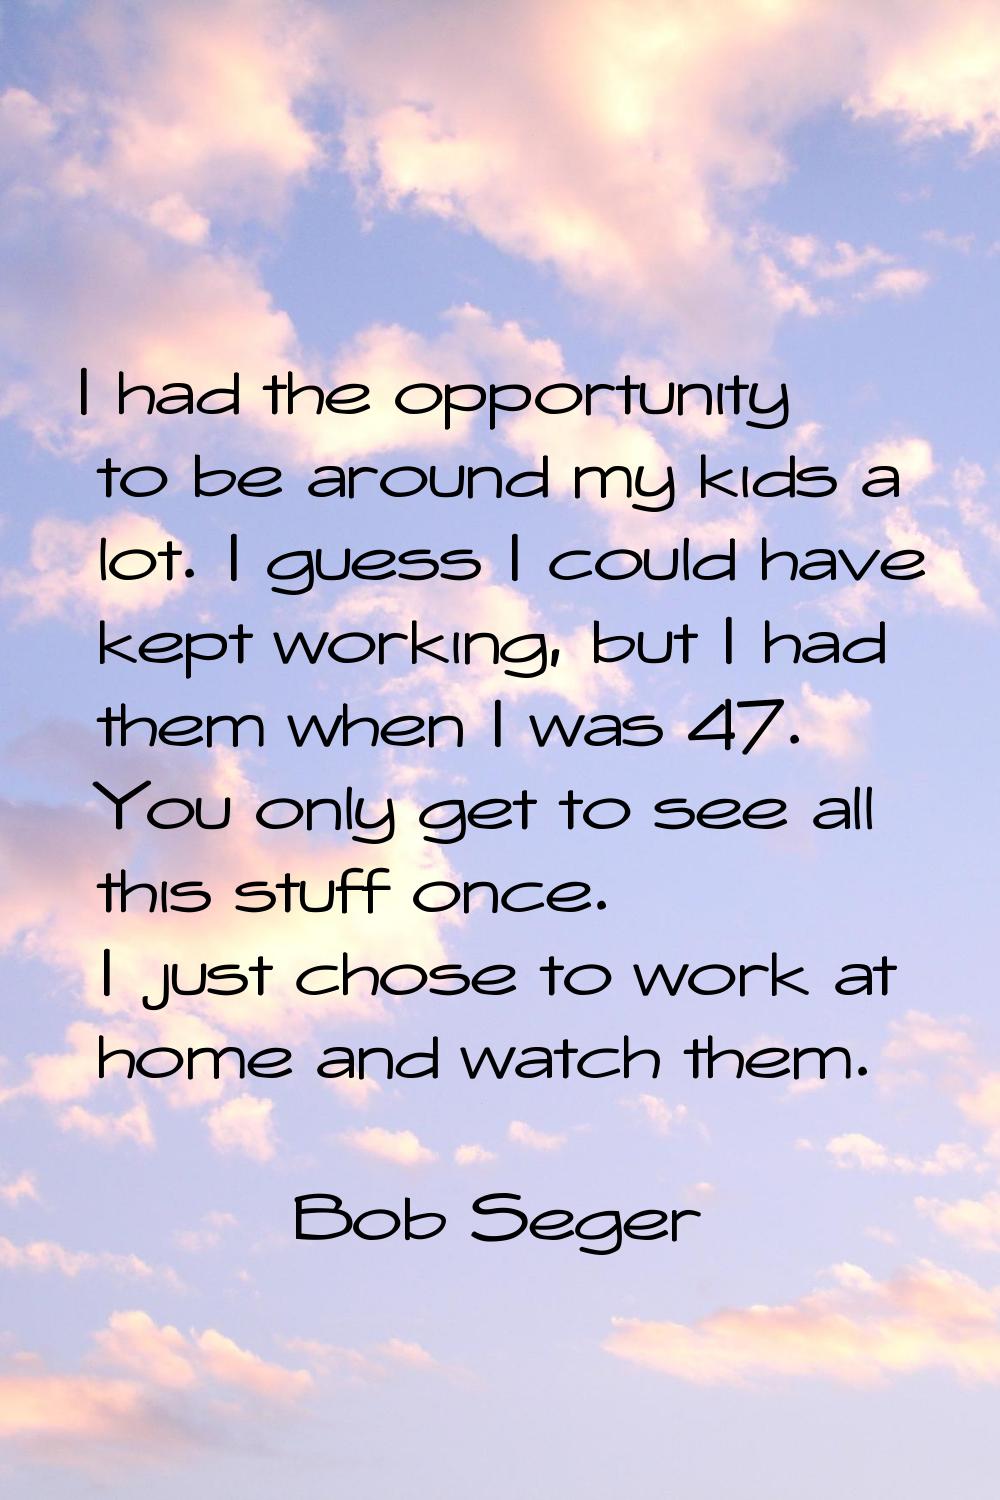 I had the opportunity to be around my kids a lot. I guess I could have kept working, but I had them